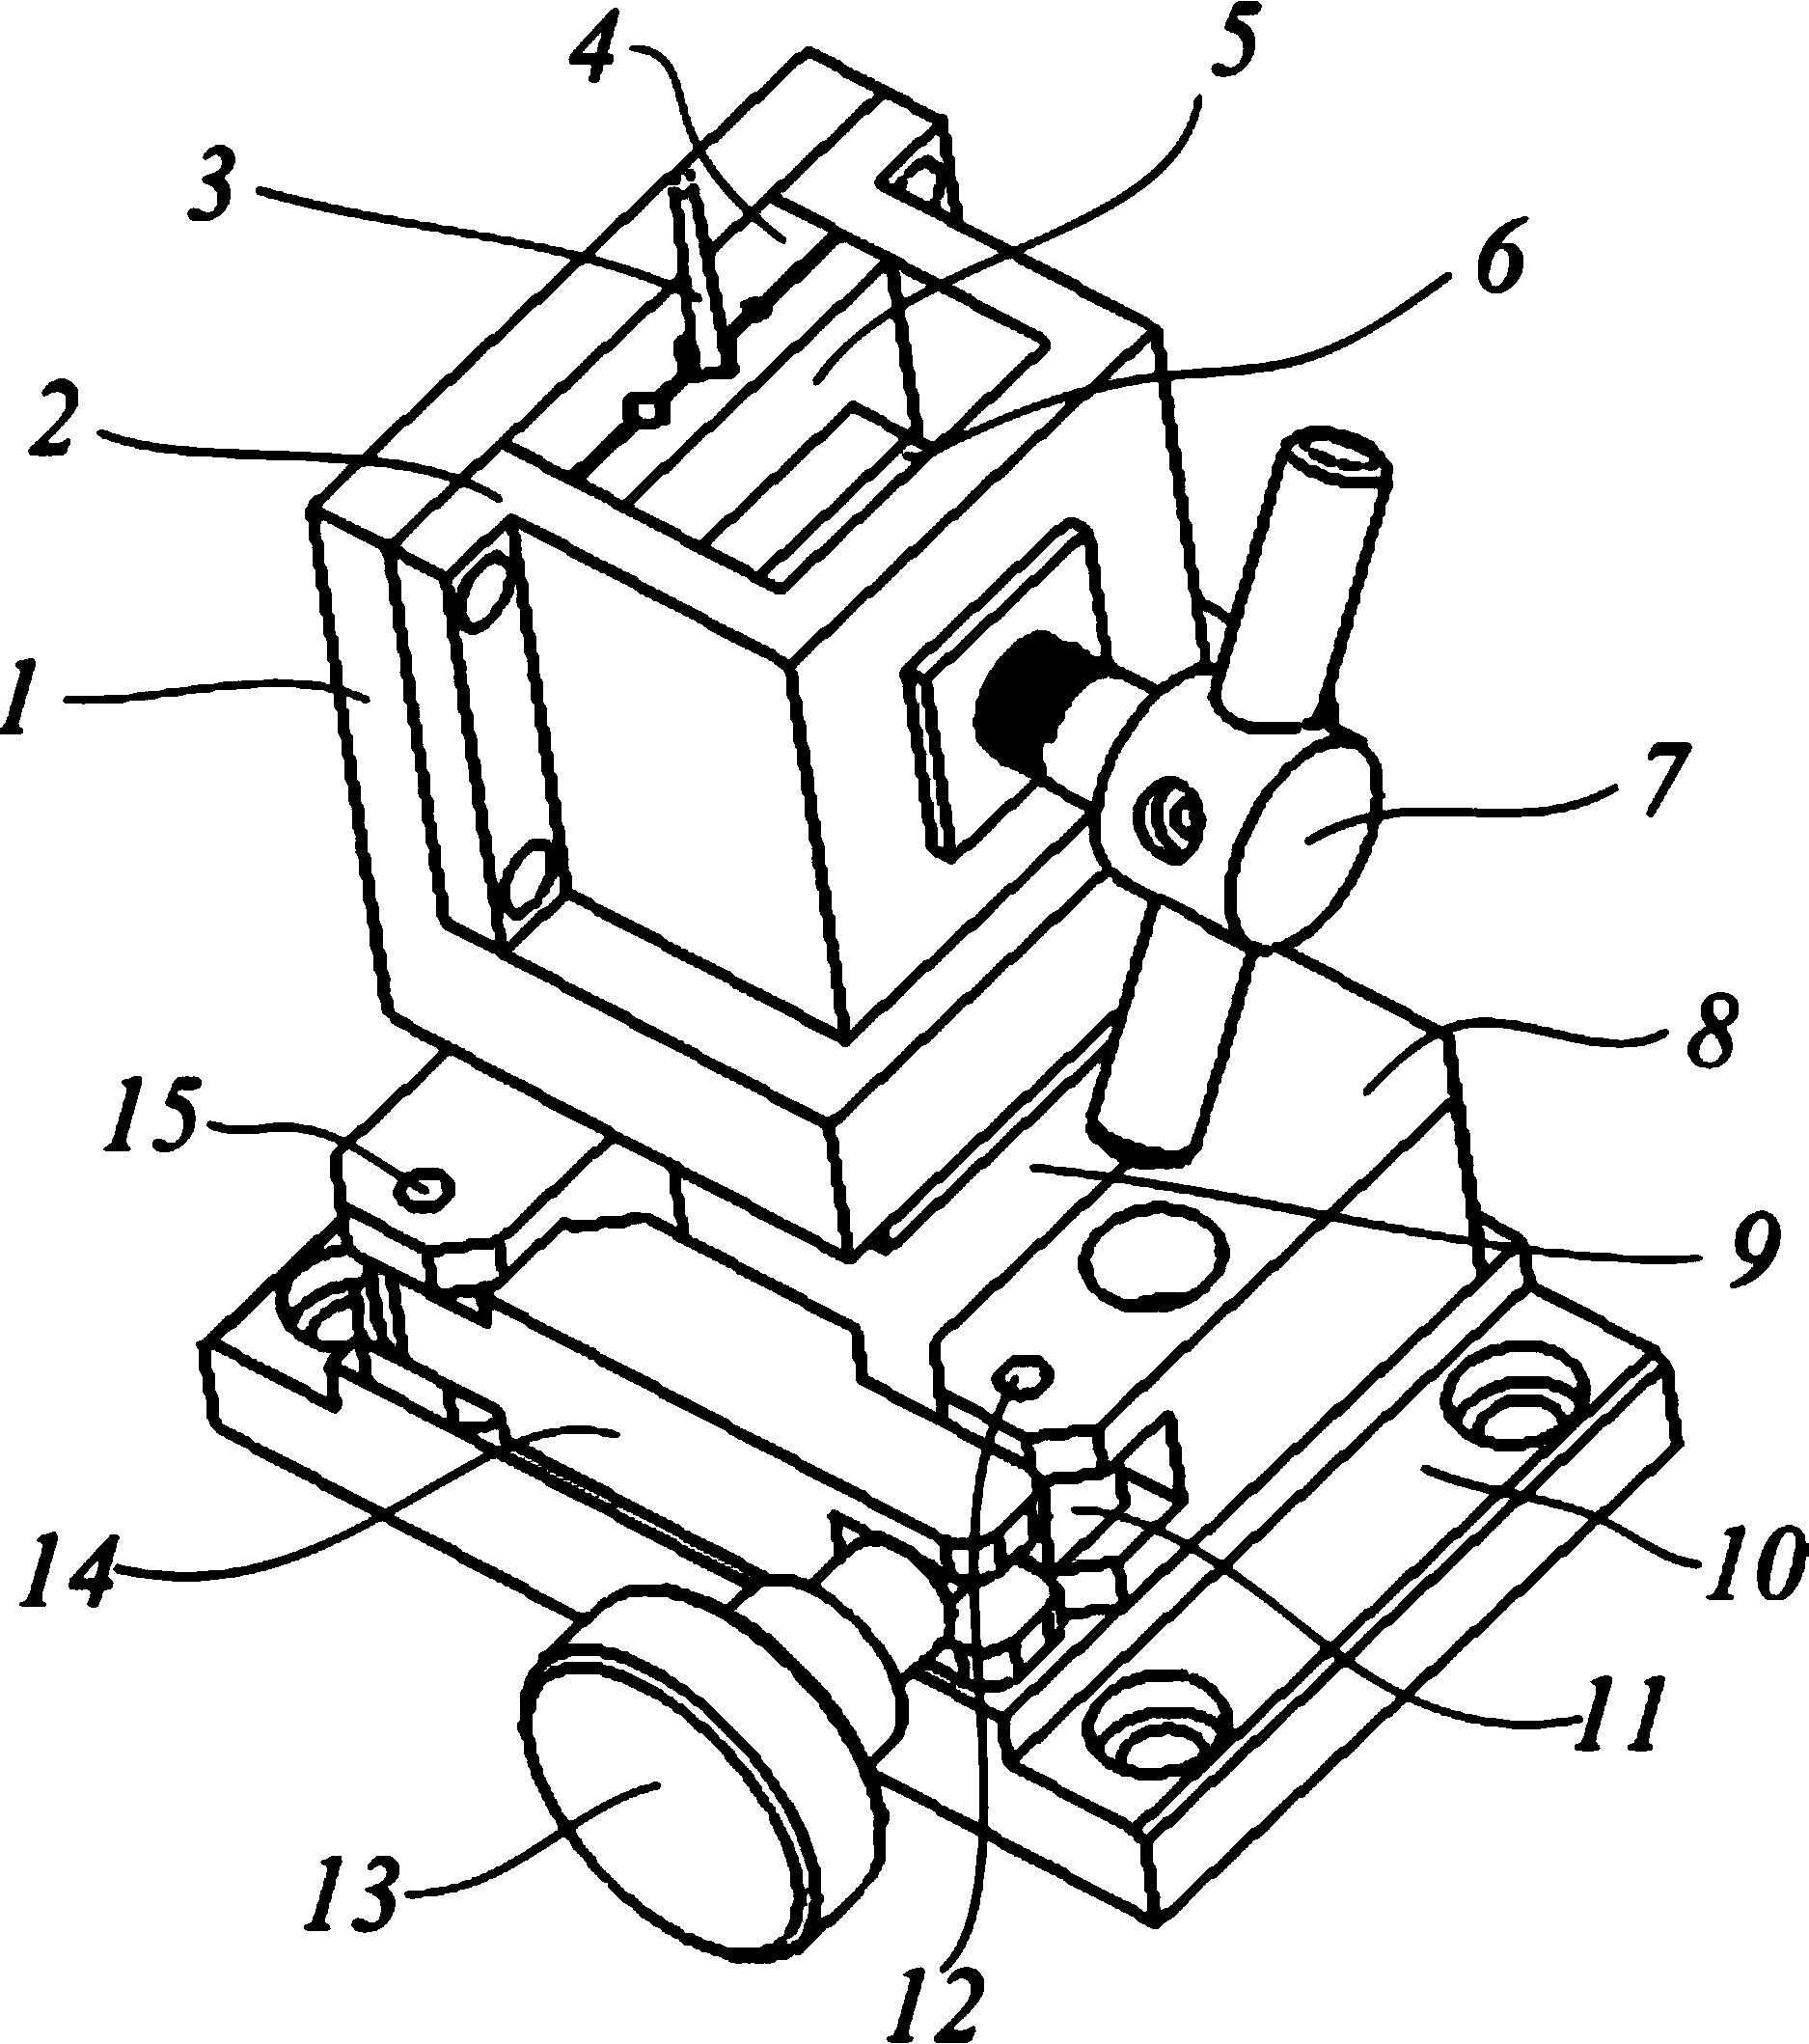 Clamping device for small-sized rod-type elastic part